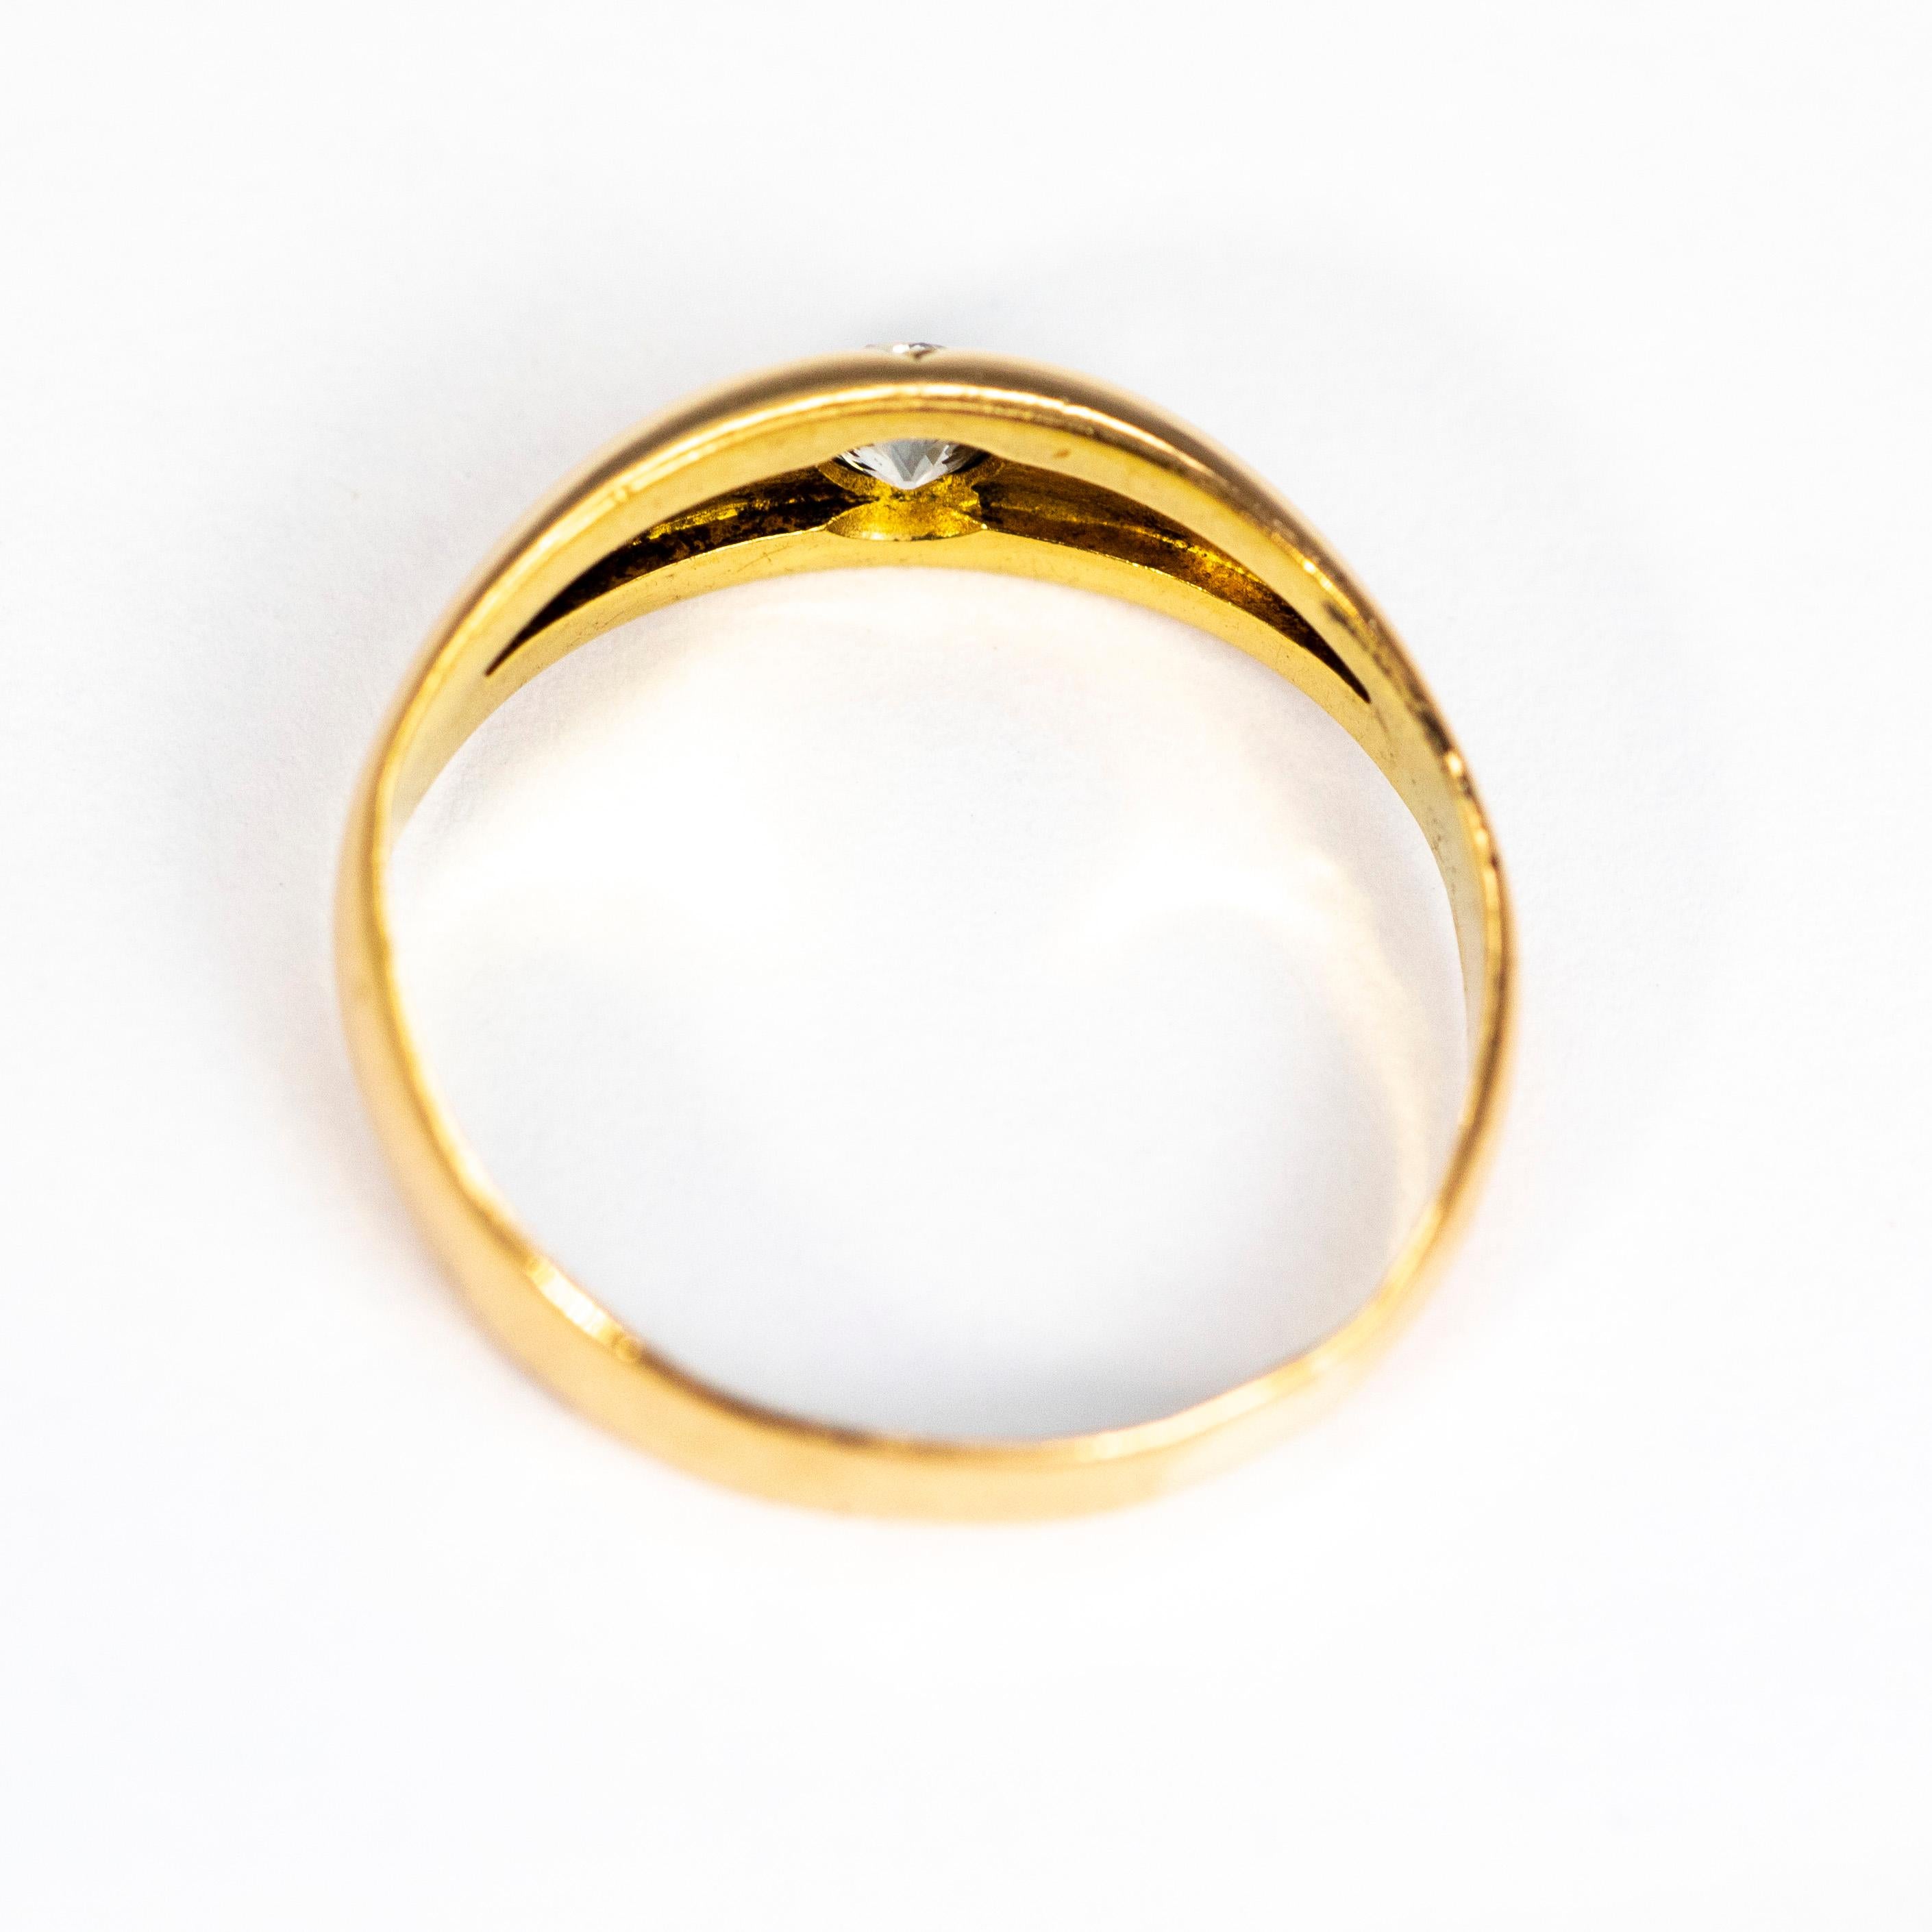 Women's or Men's Vintage Diamond and 18 Carat Gold Gypsy Ring